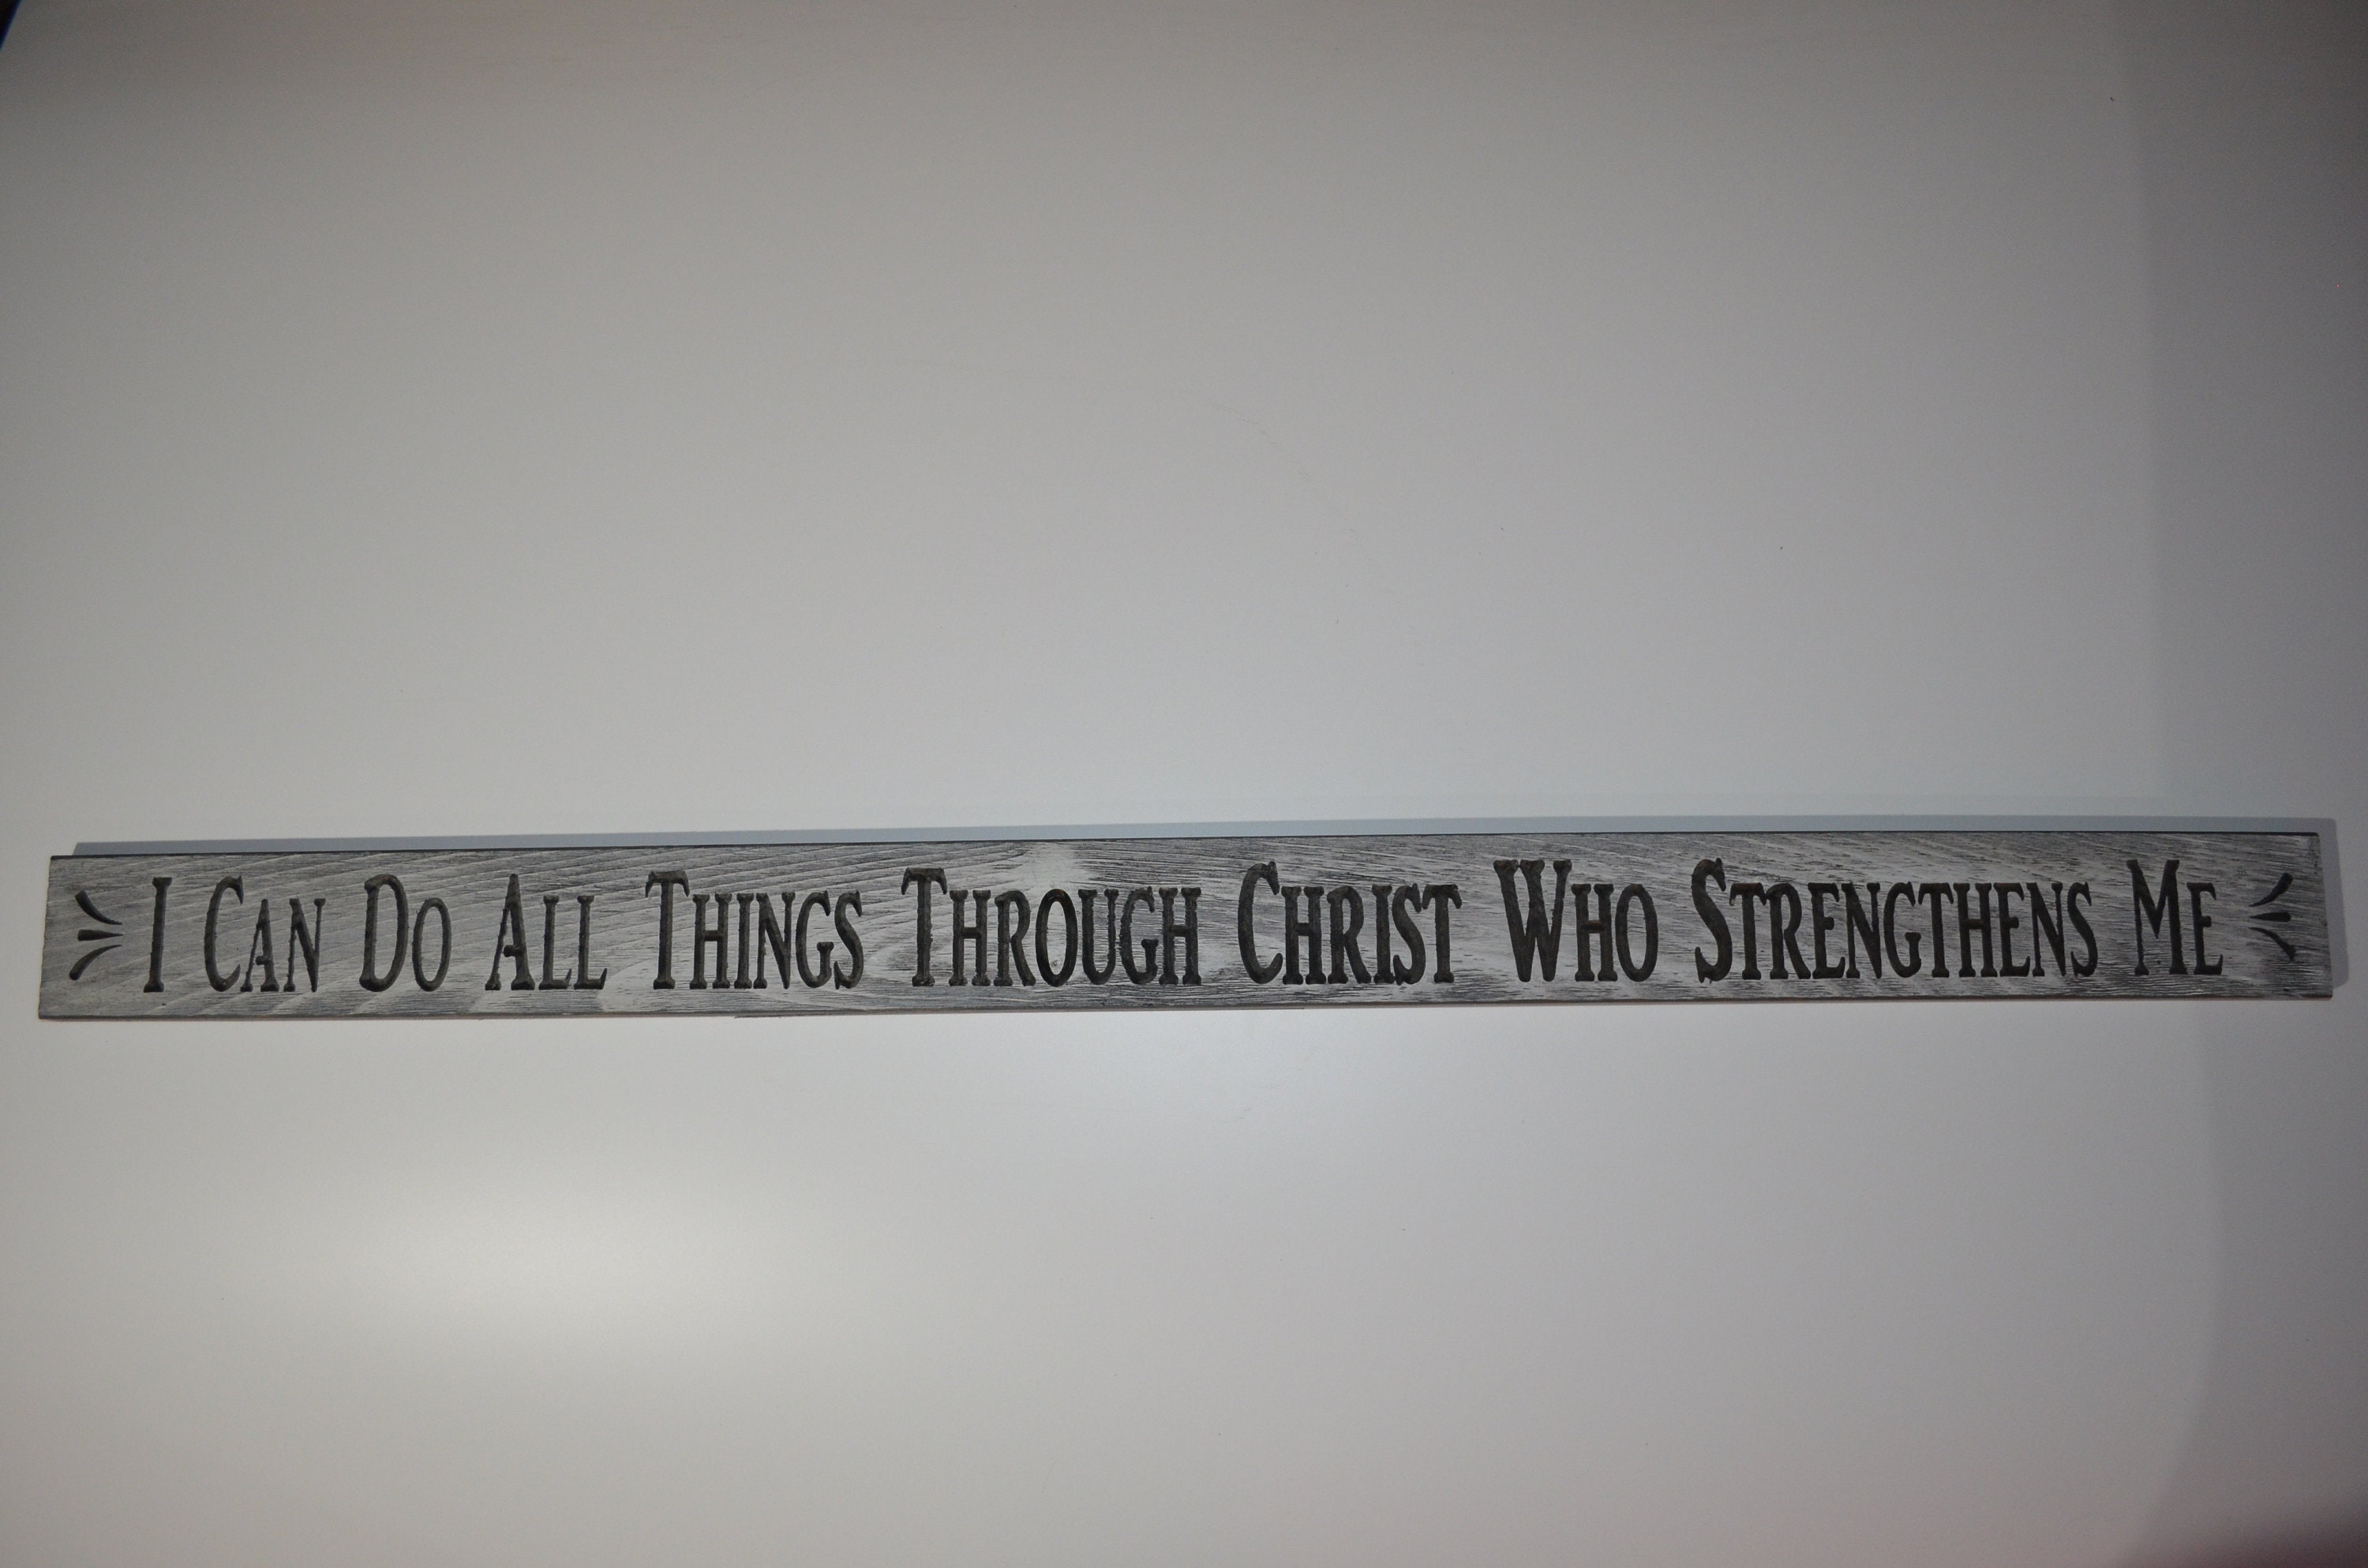 I can do all things through Christ who strengthens me - floral faith sticker